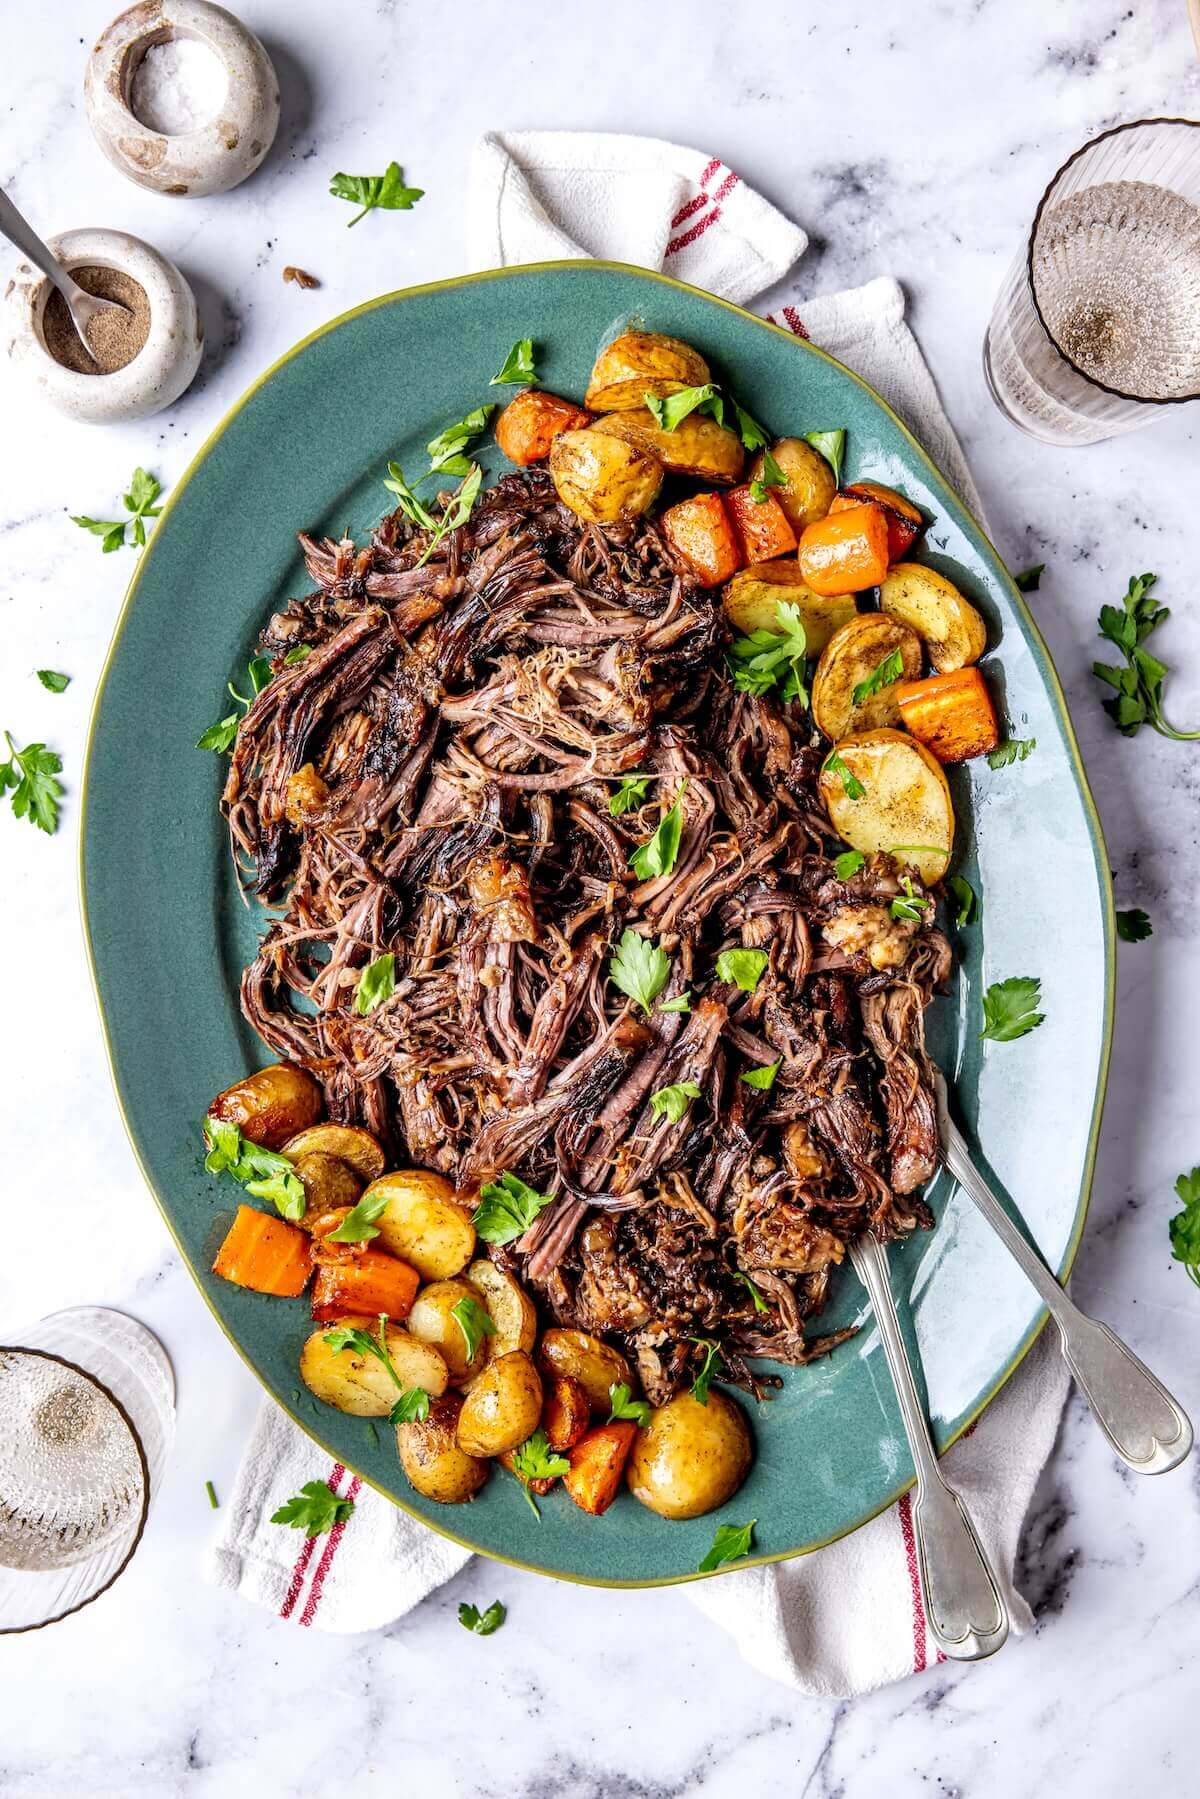 Viral Chuck Roast with Potatoes and Carrots - Olivia Adriance